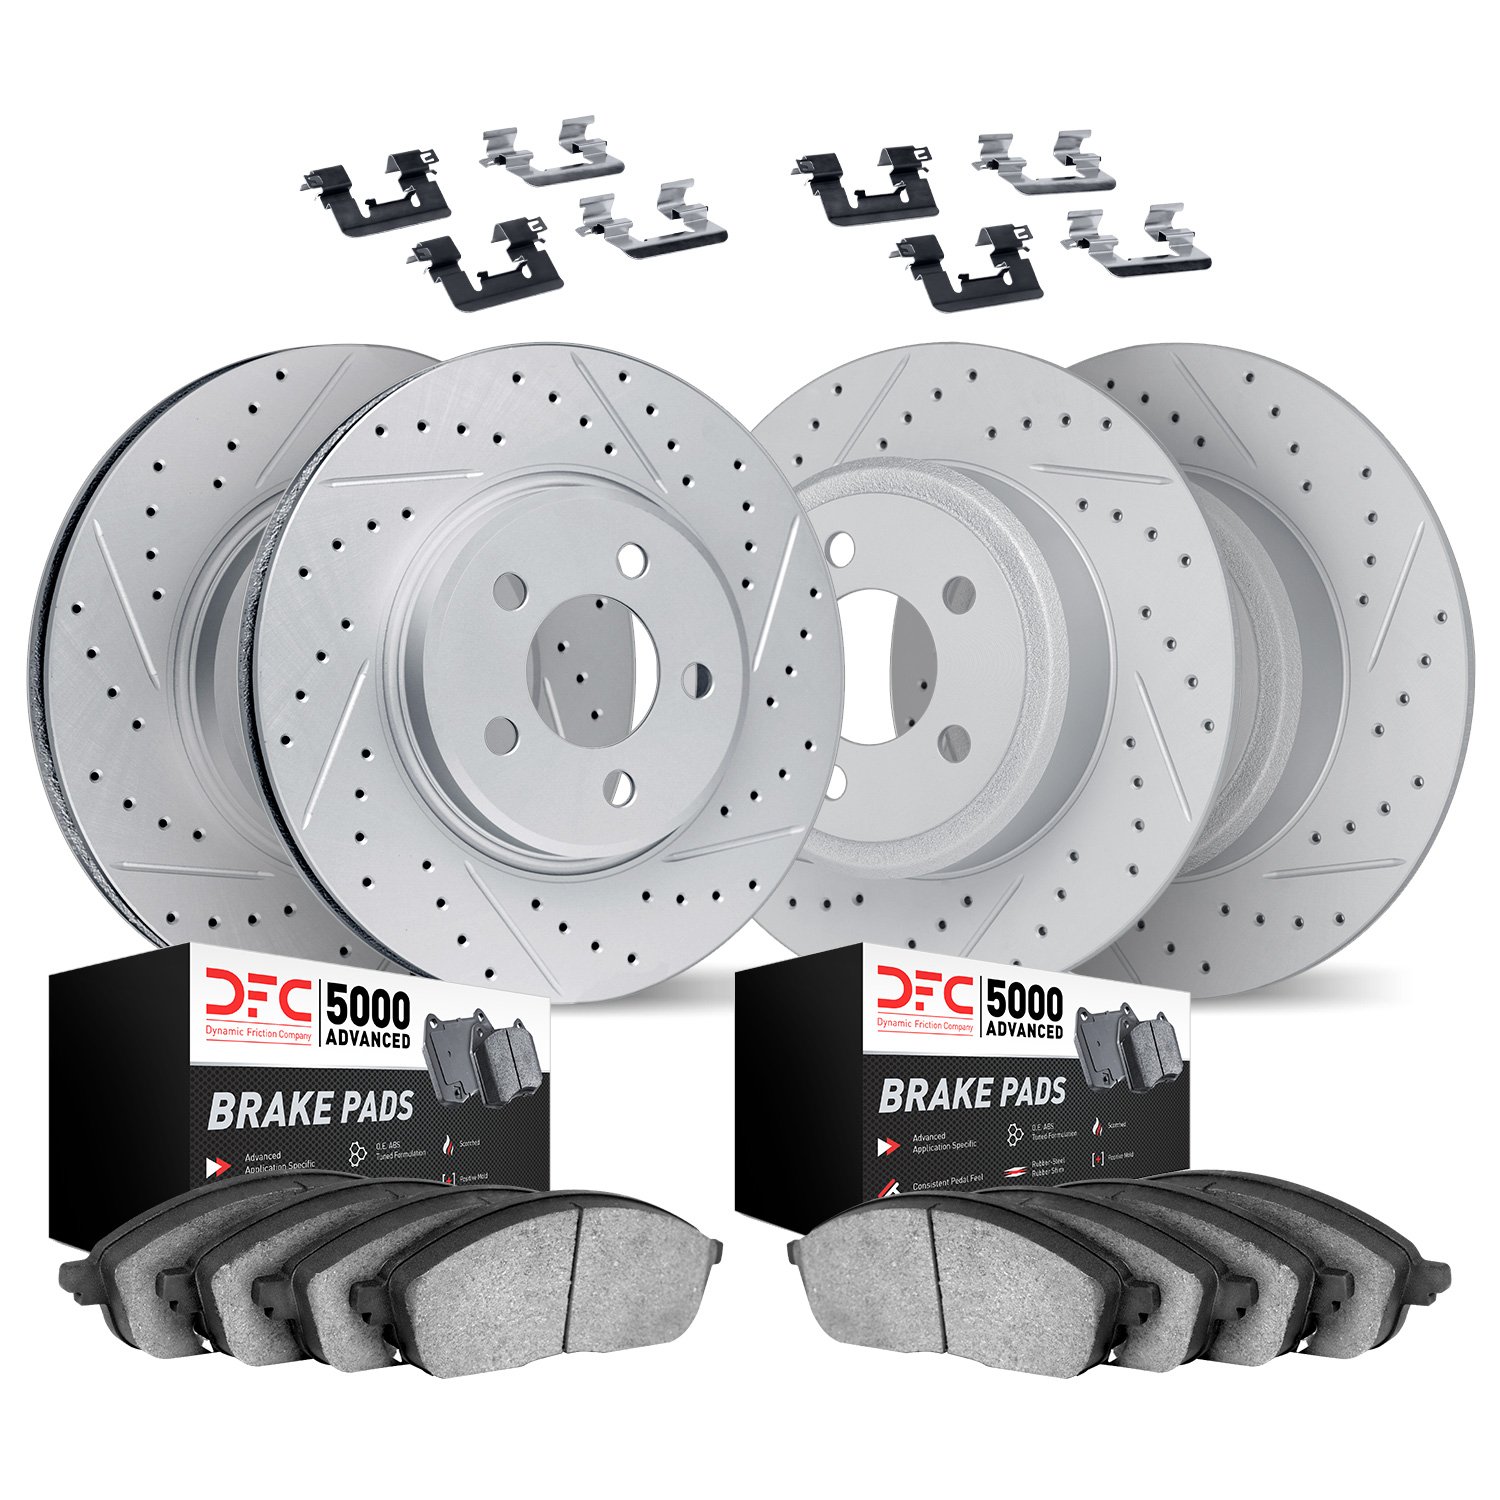 2514-52005 Geoperformance Drilled/Slotted Rotors w/5000 Advanced Brake Pads Kit & Hardware, 2005-2005 GM, Position: Front and Re